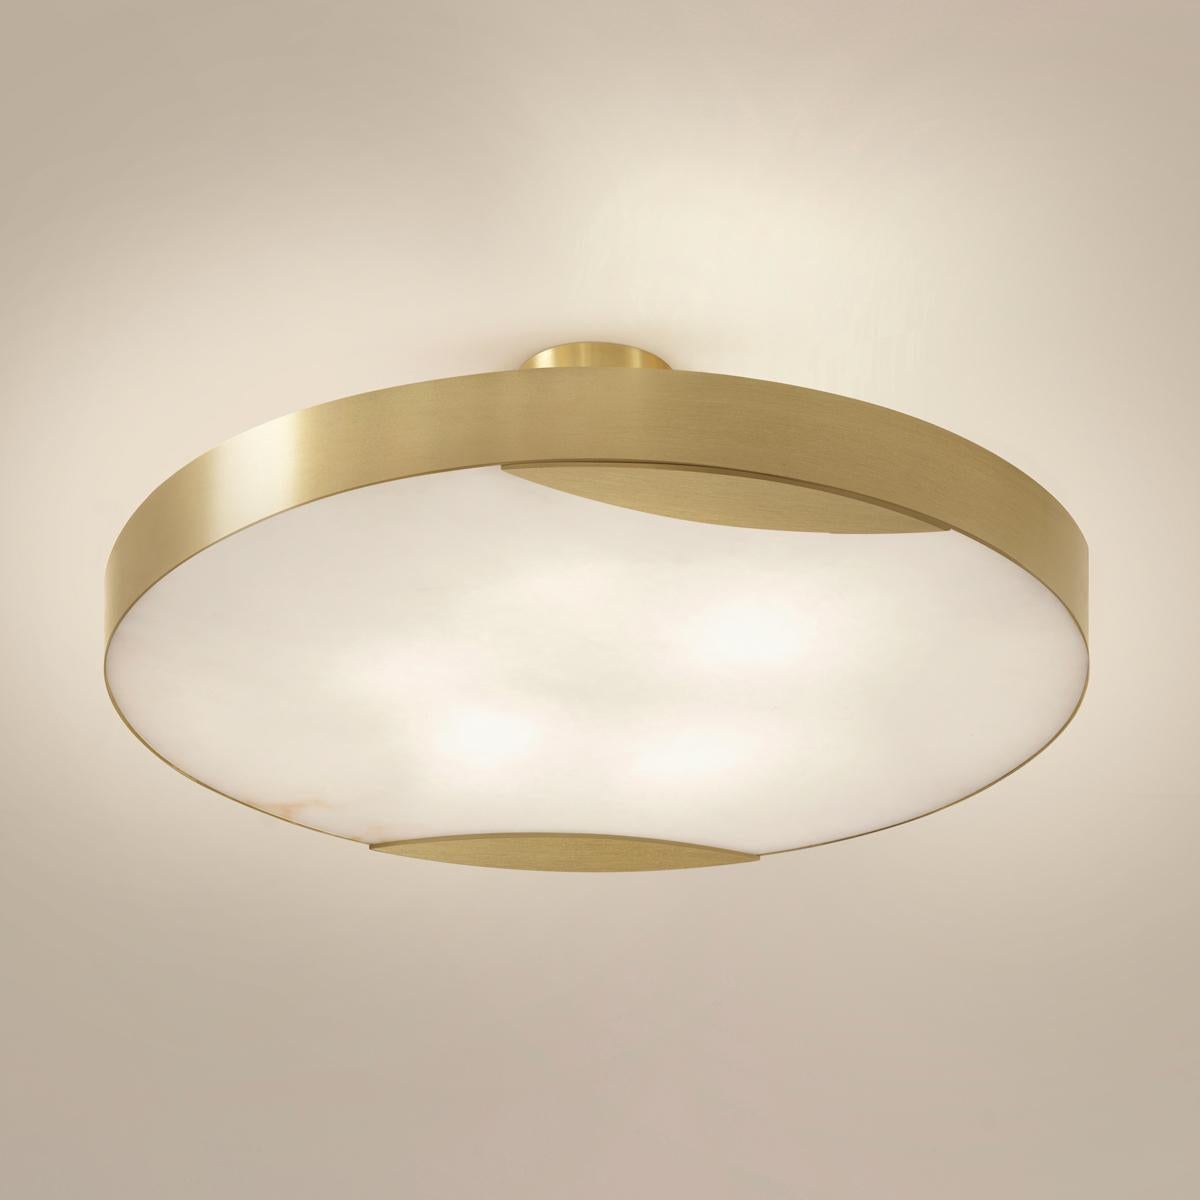 The Cloud N.1 ceiling light embodies a minimalist design with a clean brass band and a glowing Tuscan alabaster diffuser. Available in 4 sizes and can be installed as a semi flush mount or pendant.

Shown in the primary images in satin